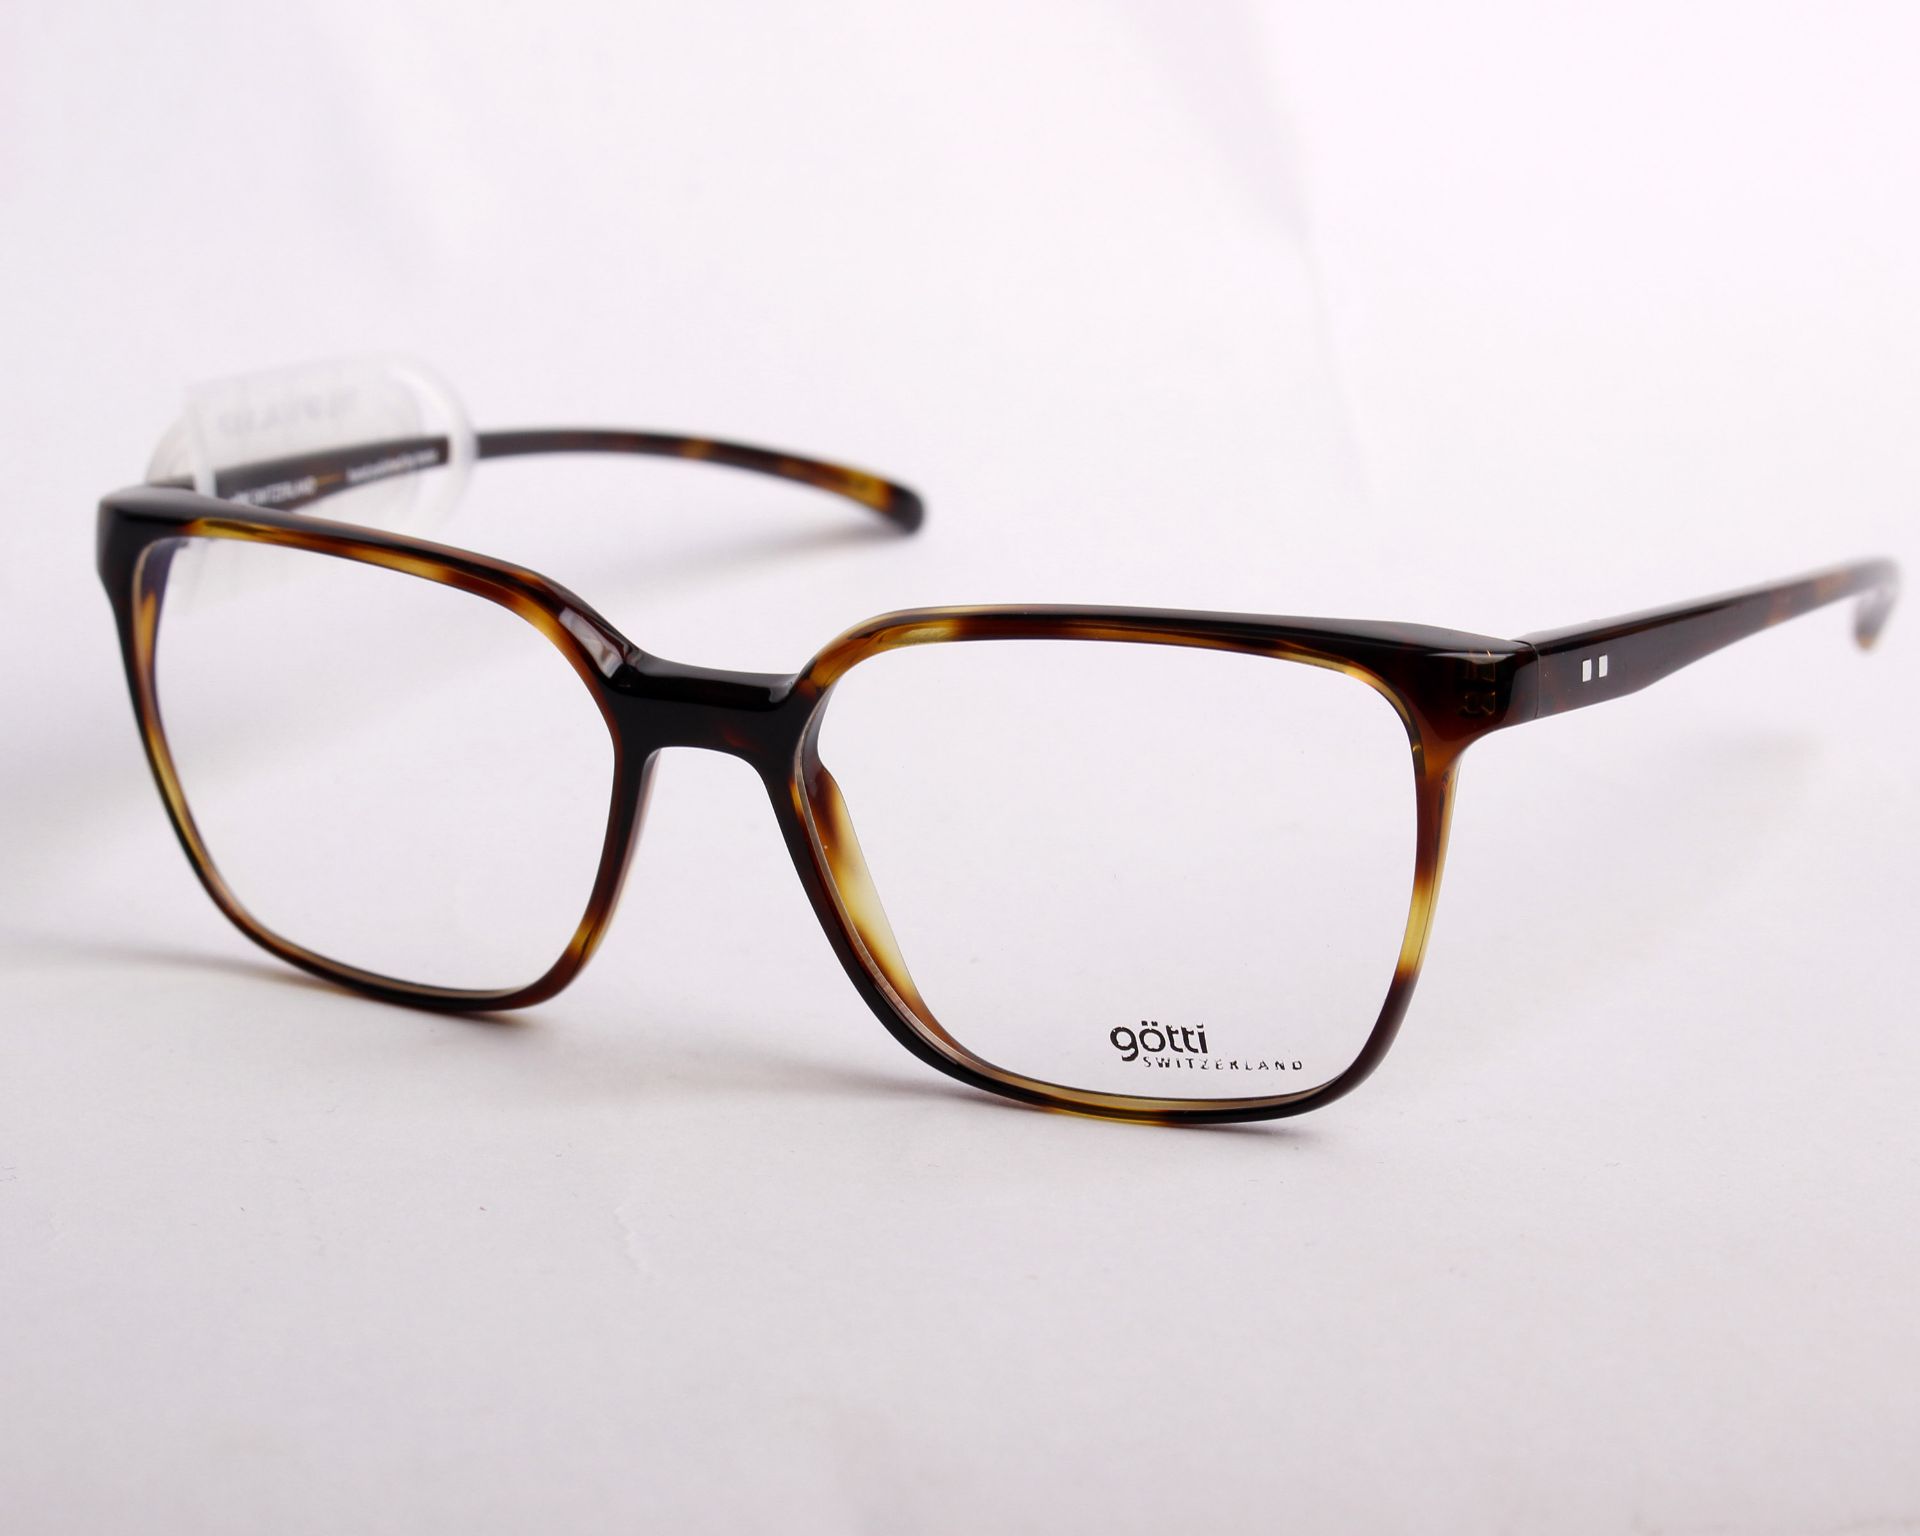 A pair of as new Gotti glass frames with clear glass (RRP £300).